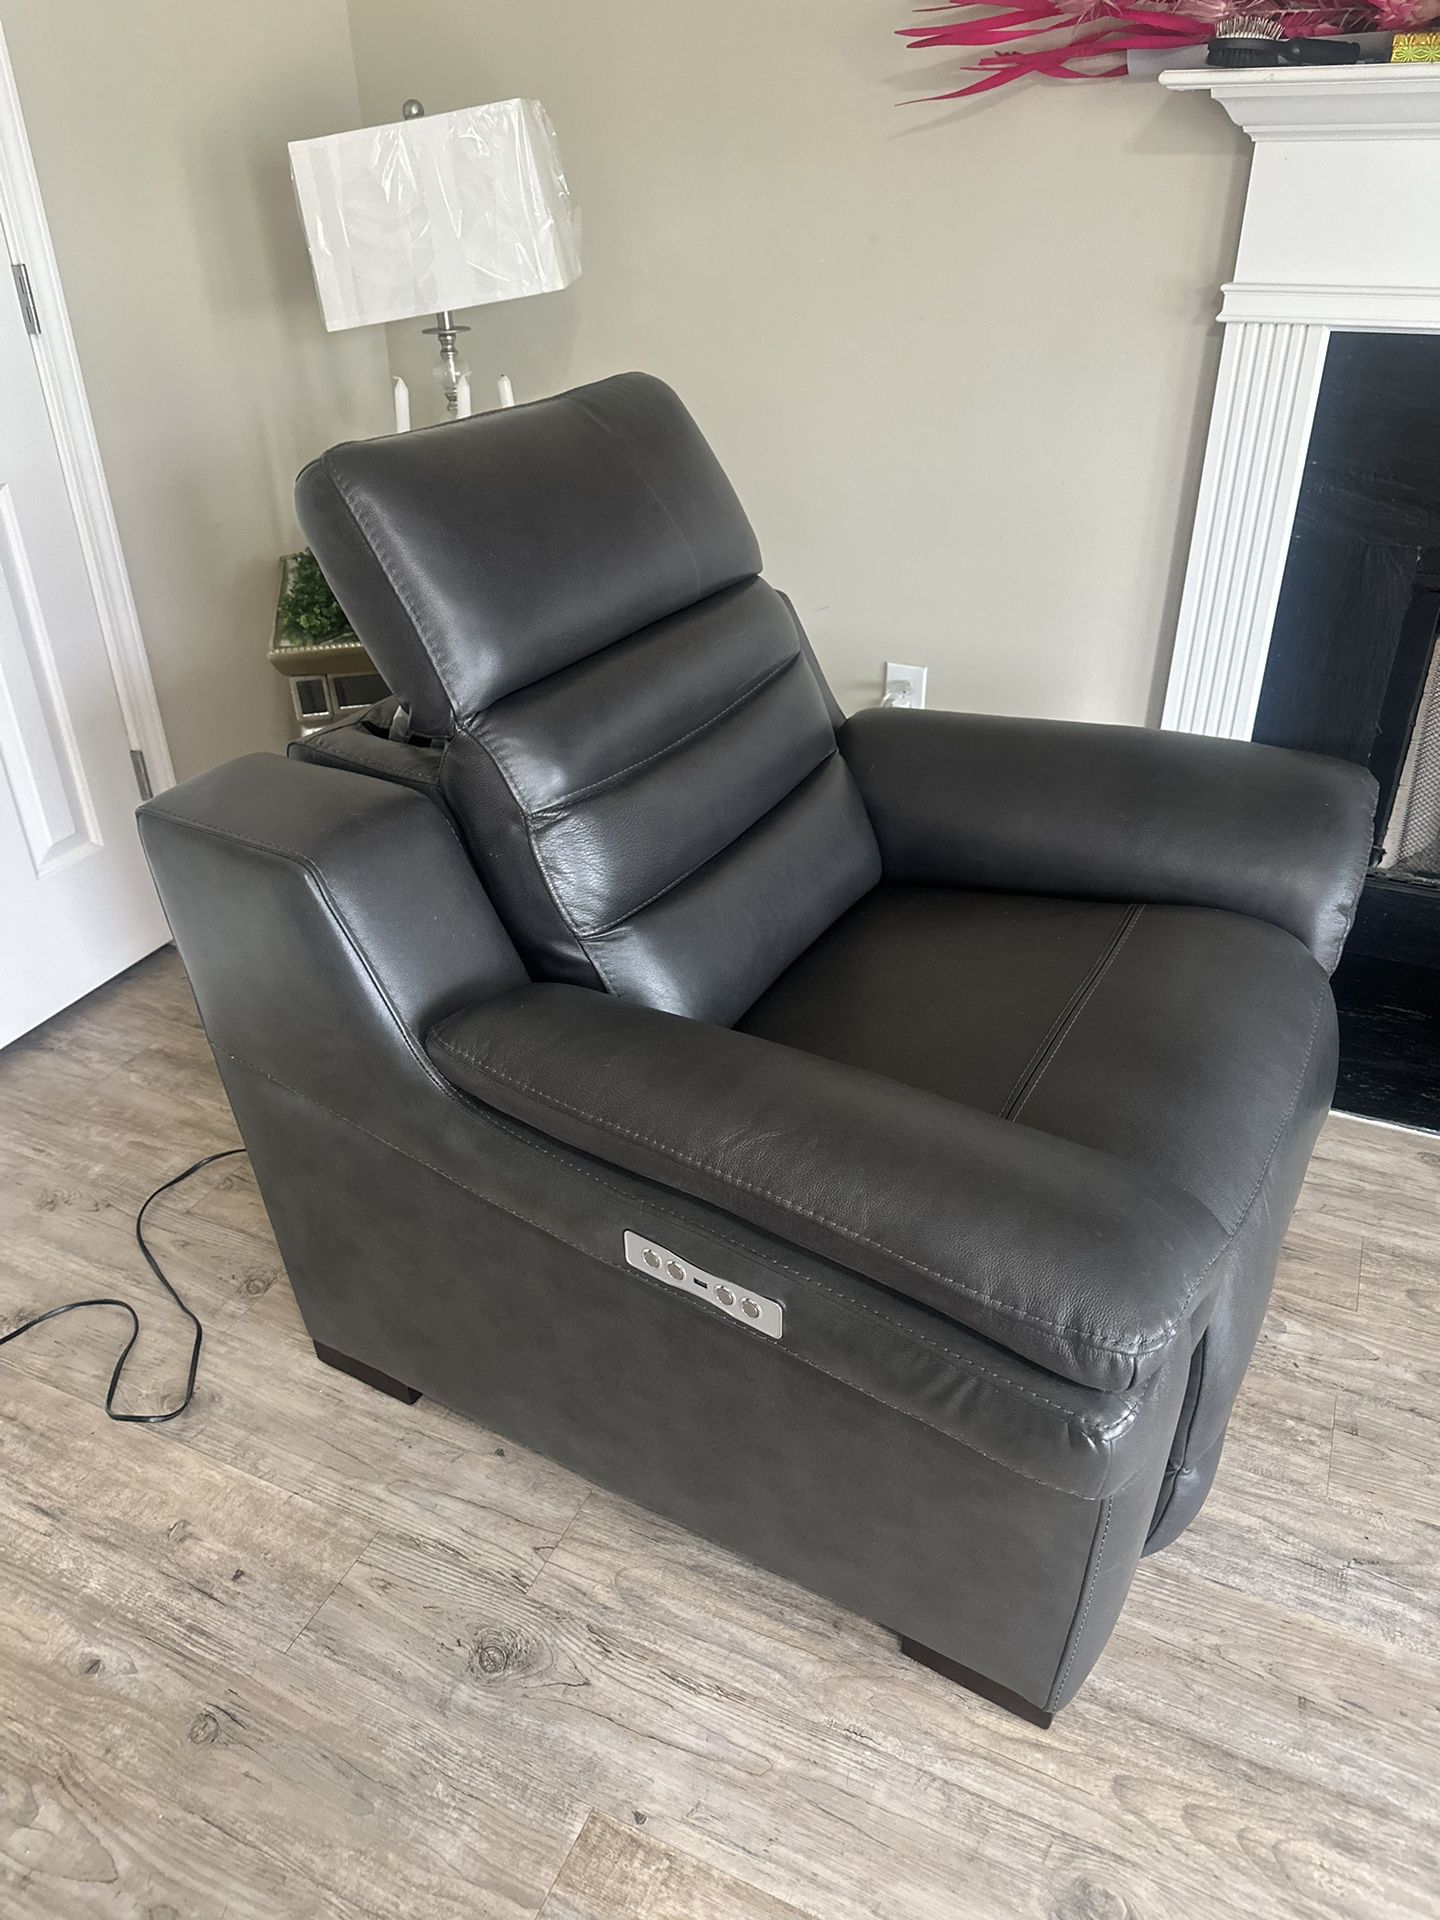 Recliner For Sale 